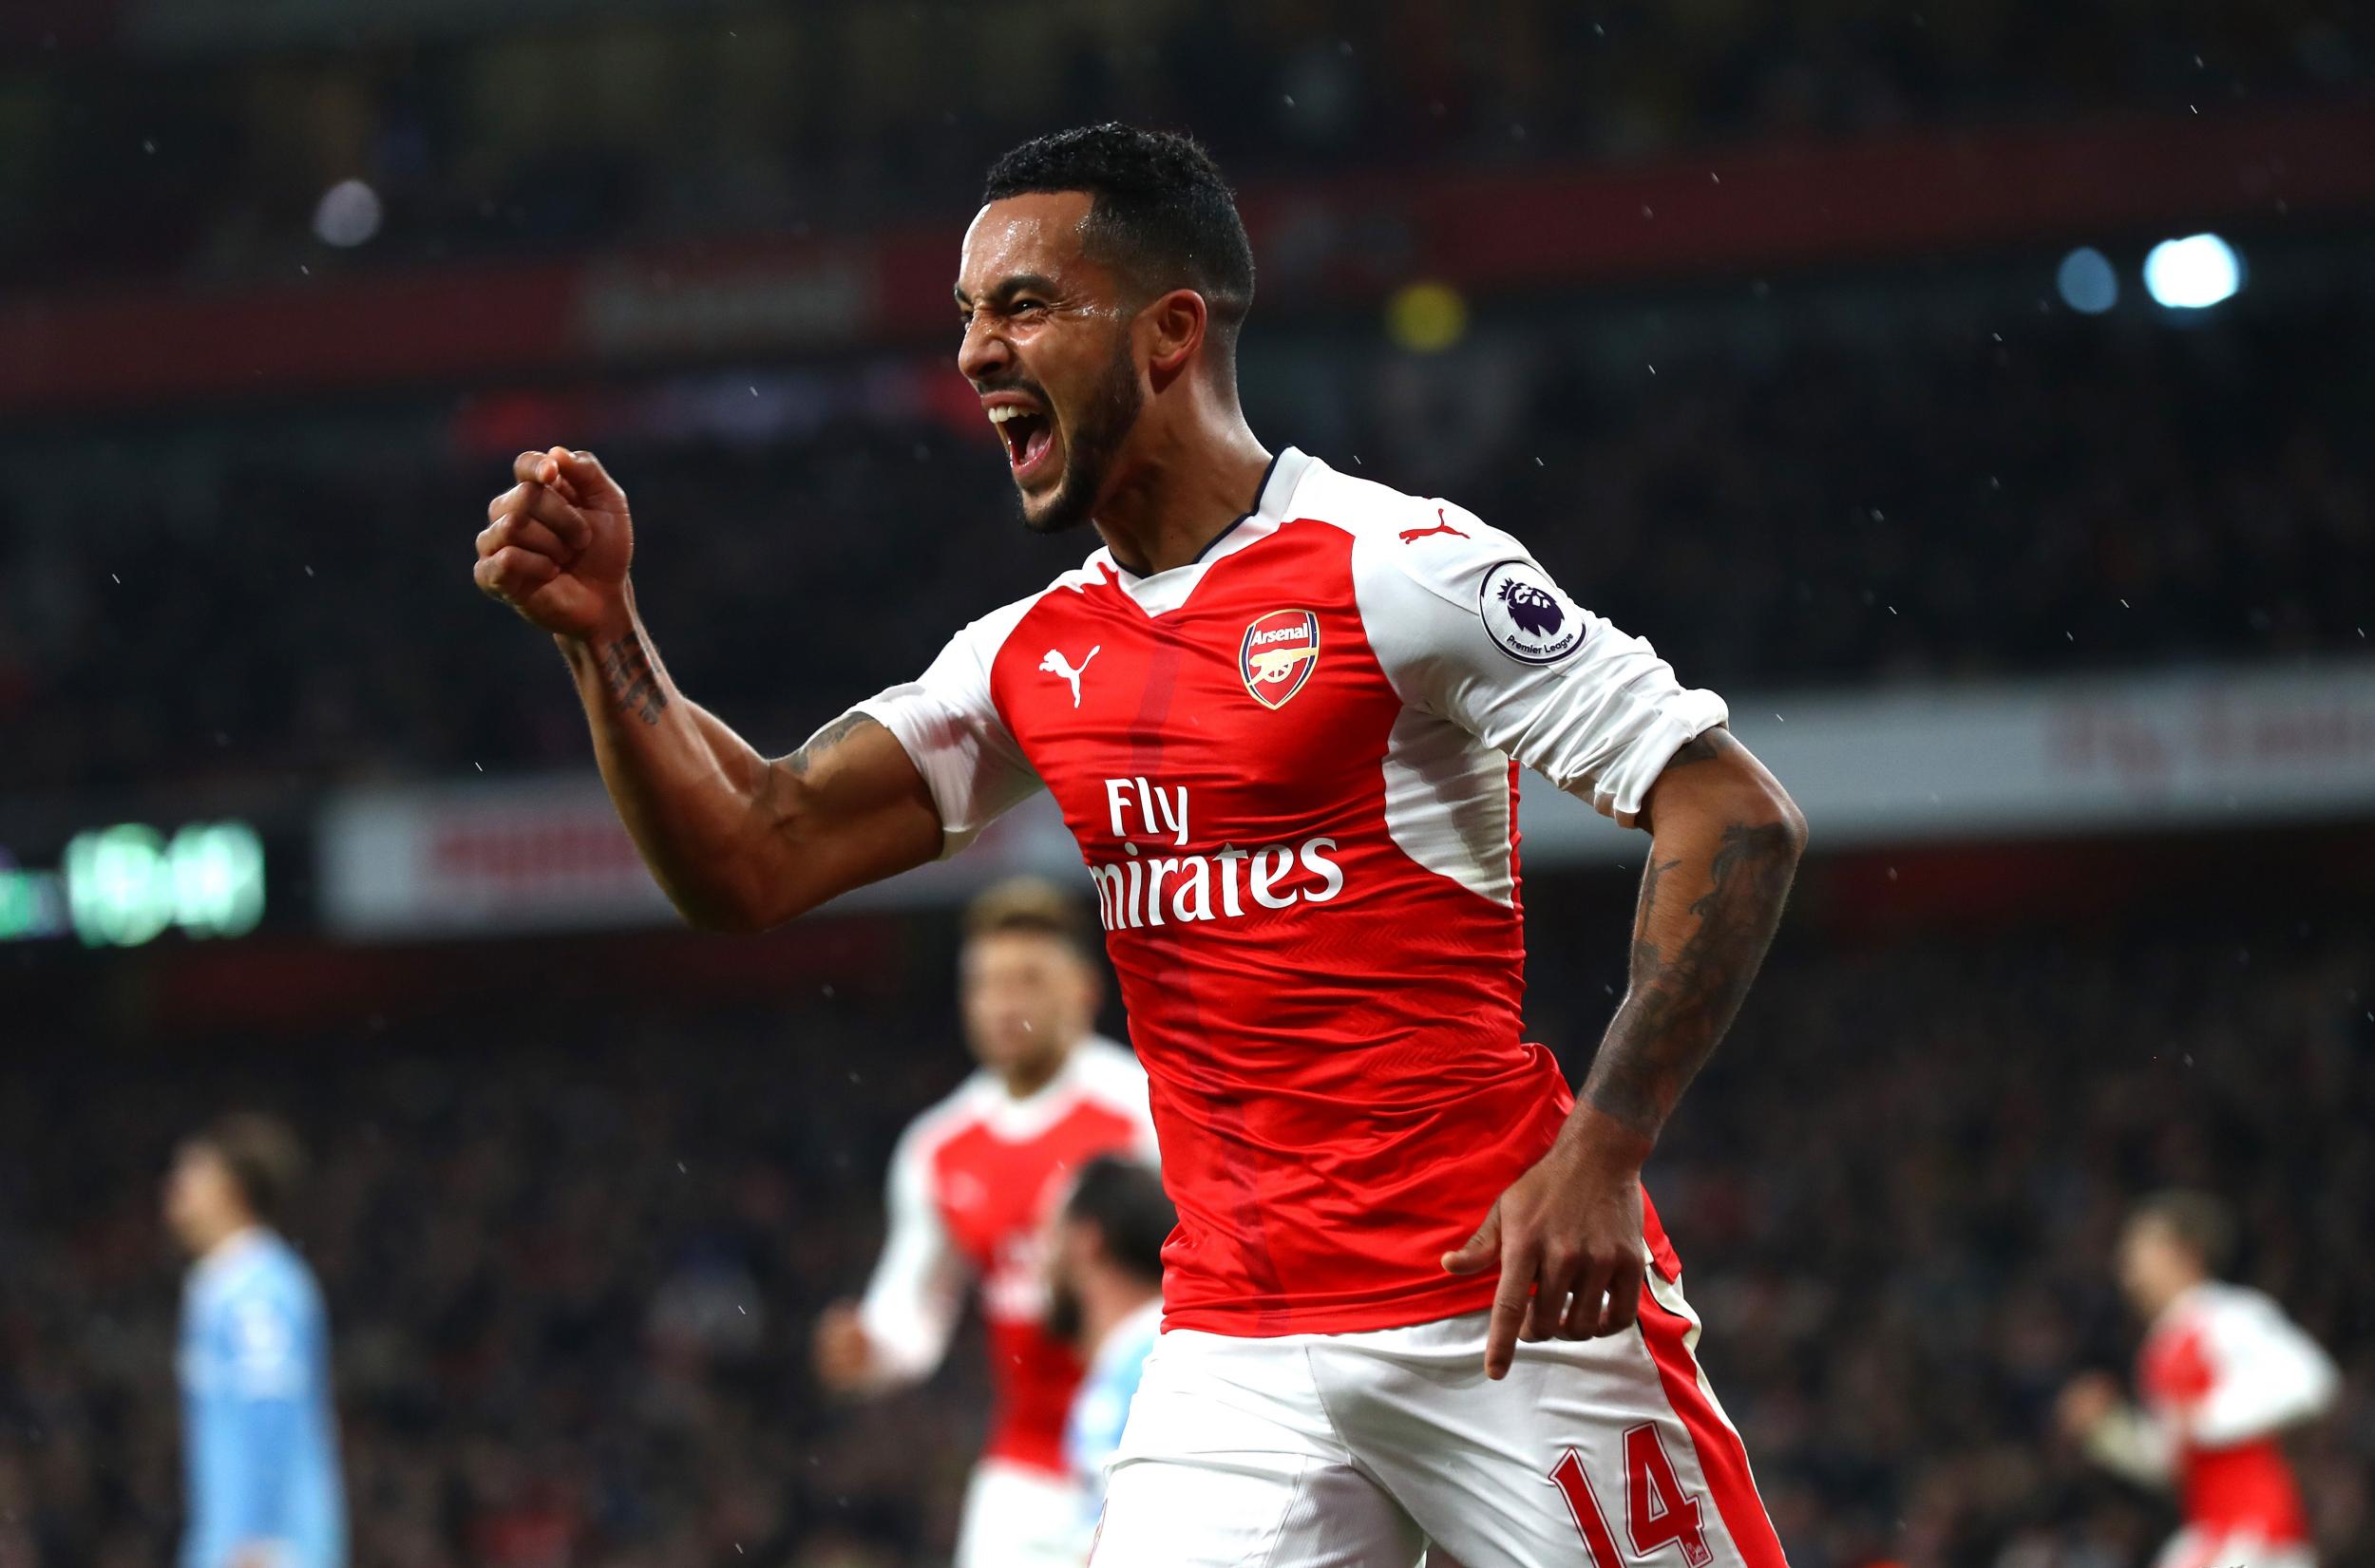 Theo Walcott equalises after he's picked out at the near post by Hector Bellerin